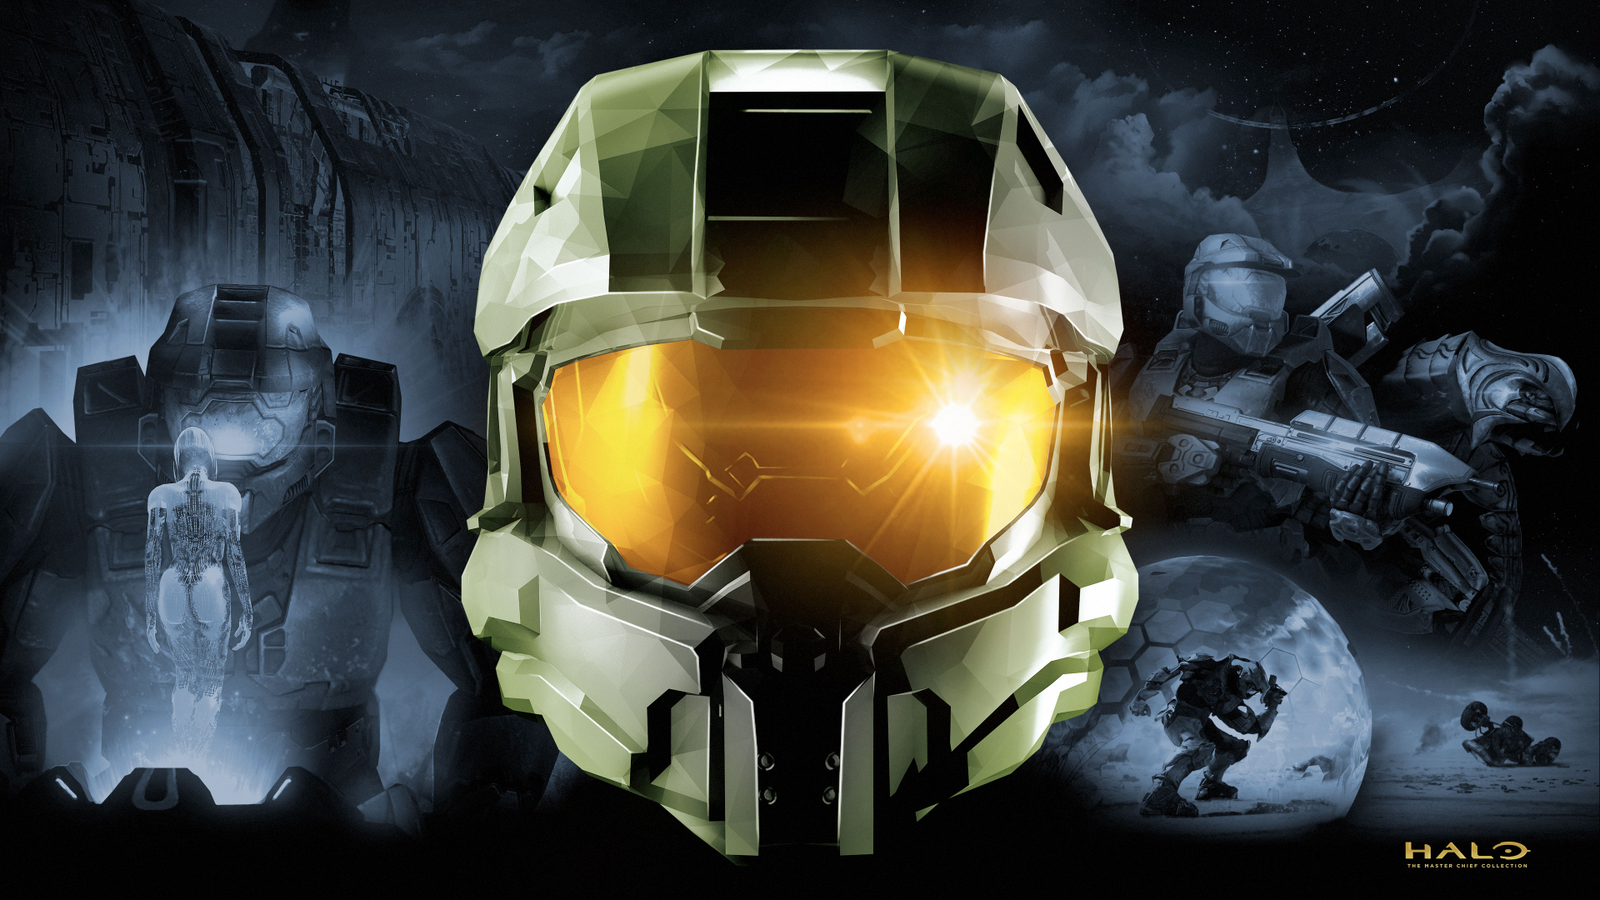 Halo and Master Chief are here to stay,